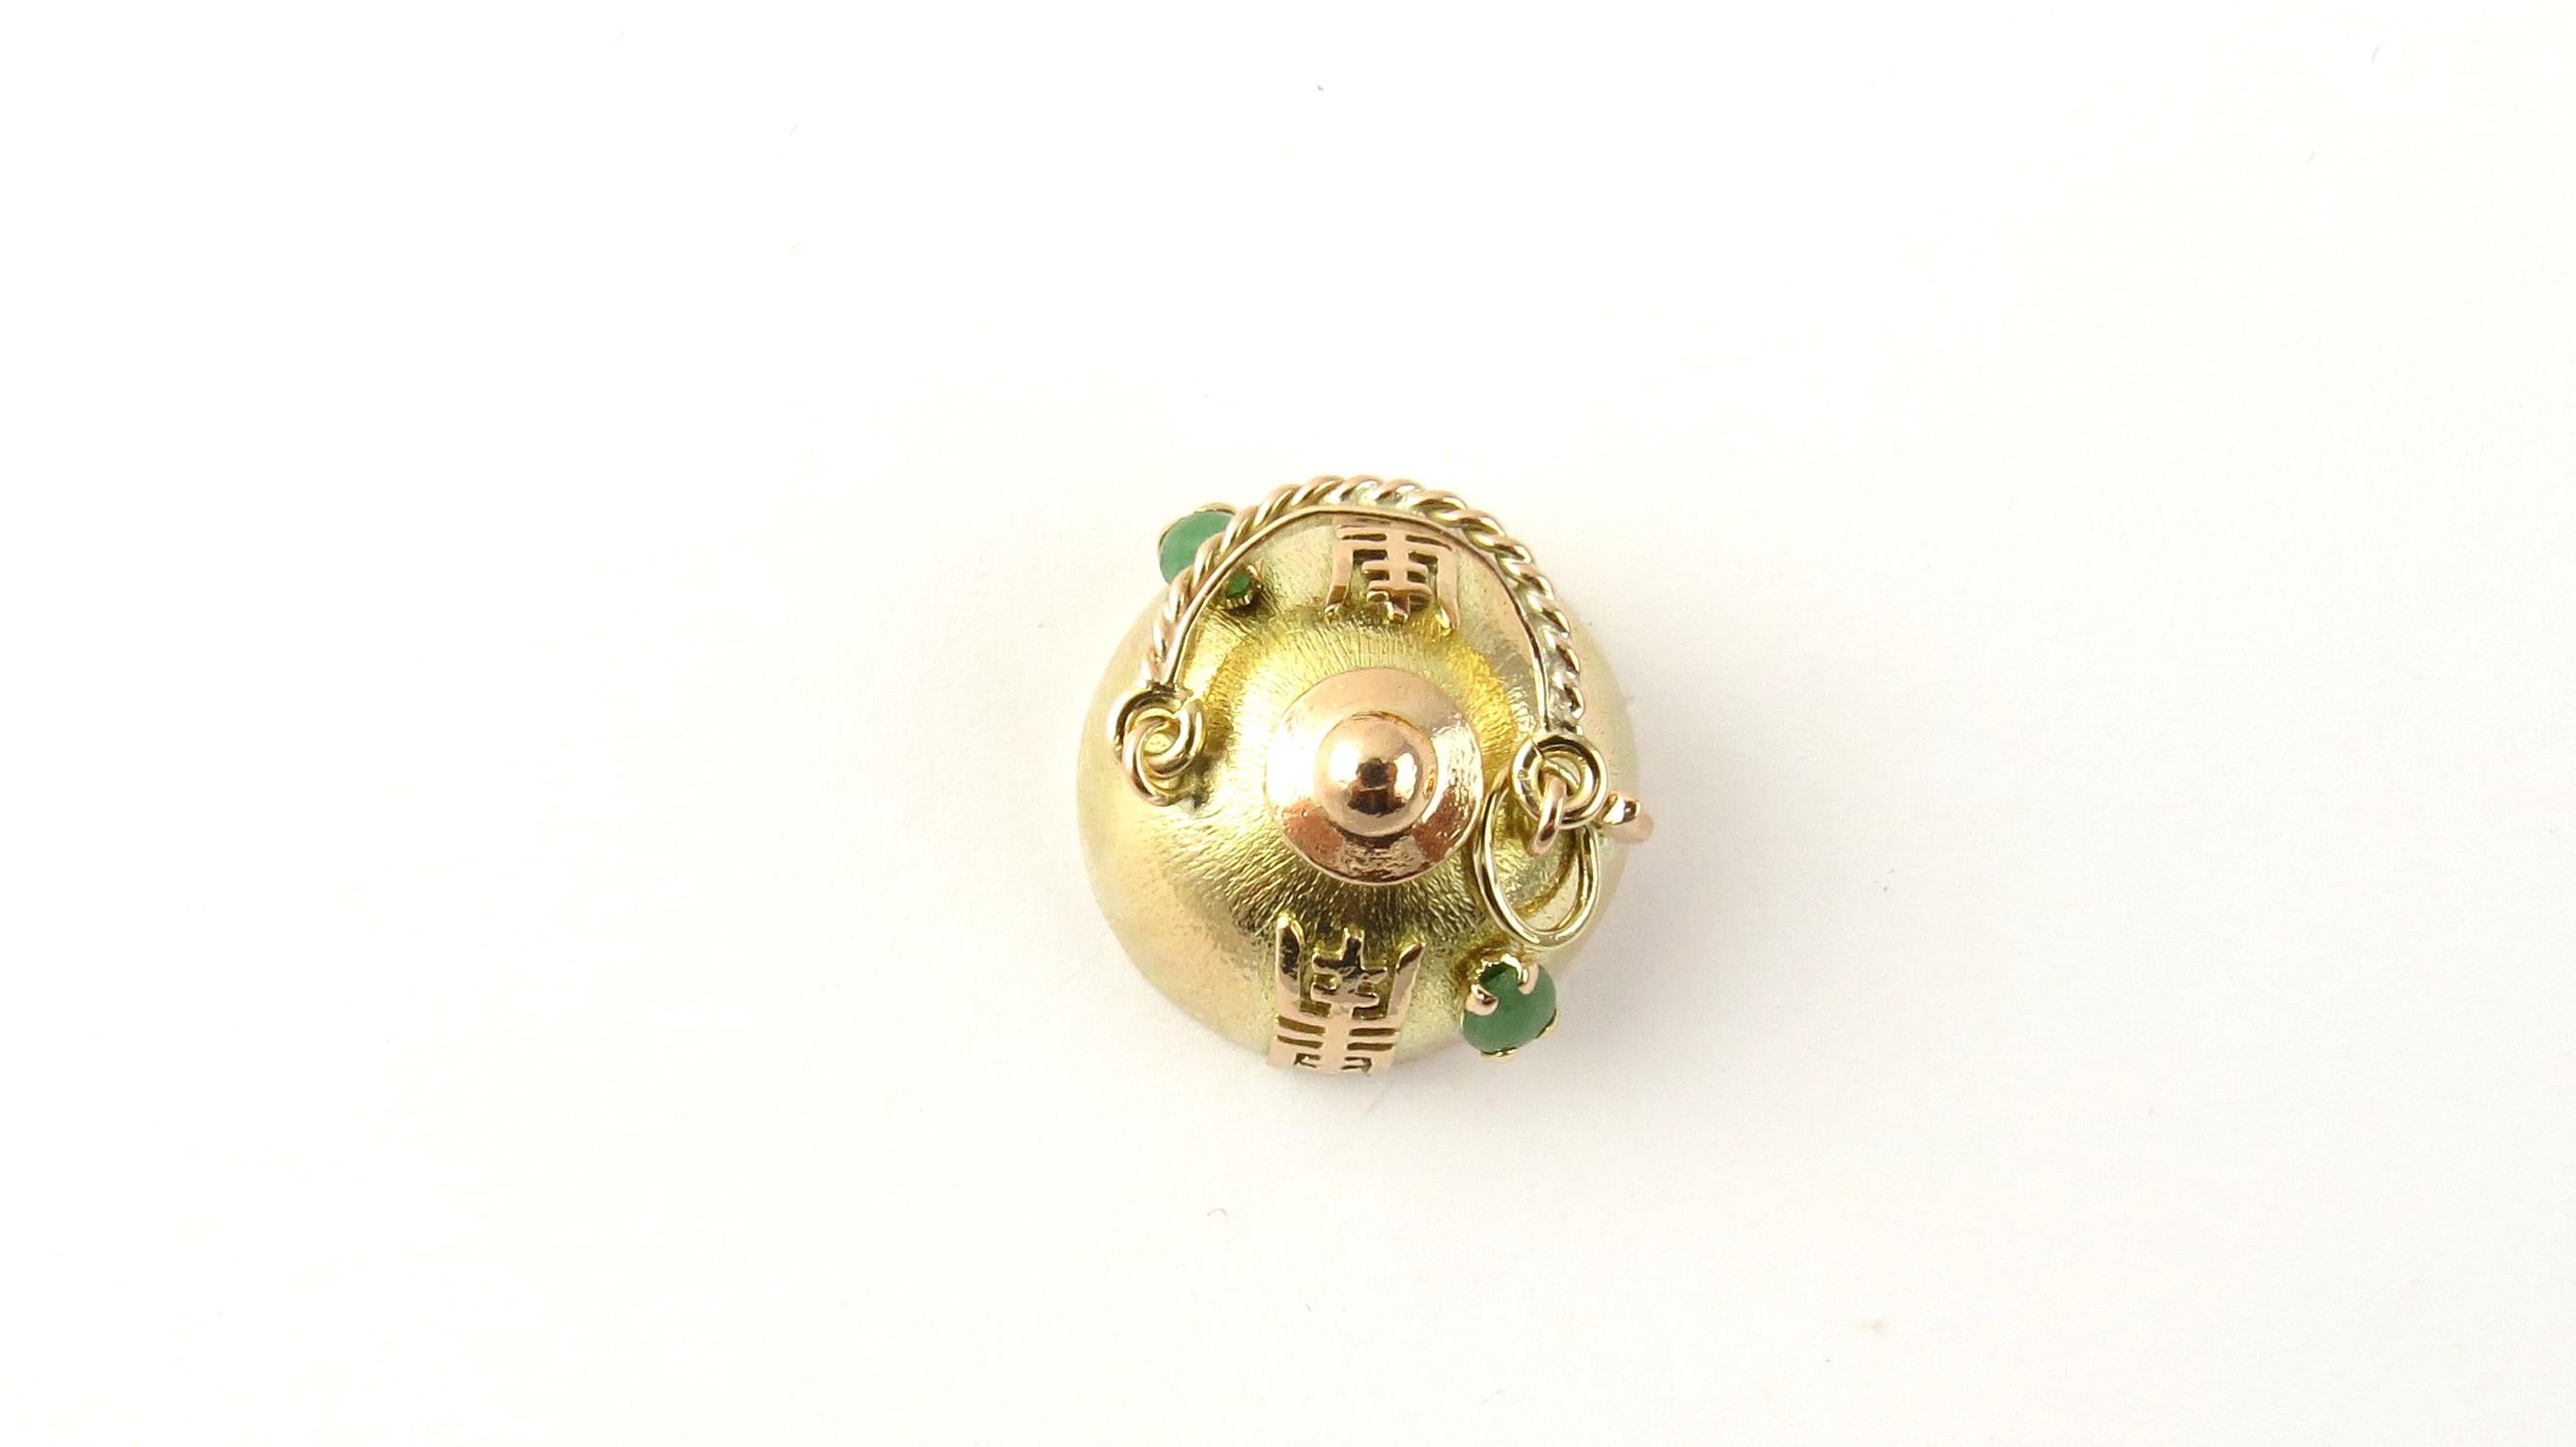 Vintage 14 Karat Yellow Gold Teapot Charm

Tea time!

This lovely 3D charm features a miniature teapot decorated with Chinese characters and two jade stones beautifully detailed in 14K yellow gold.

Size: 18 mm x 19 mm

Weight: 4.6 dwt. / 7.3